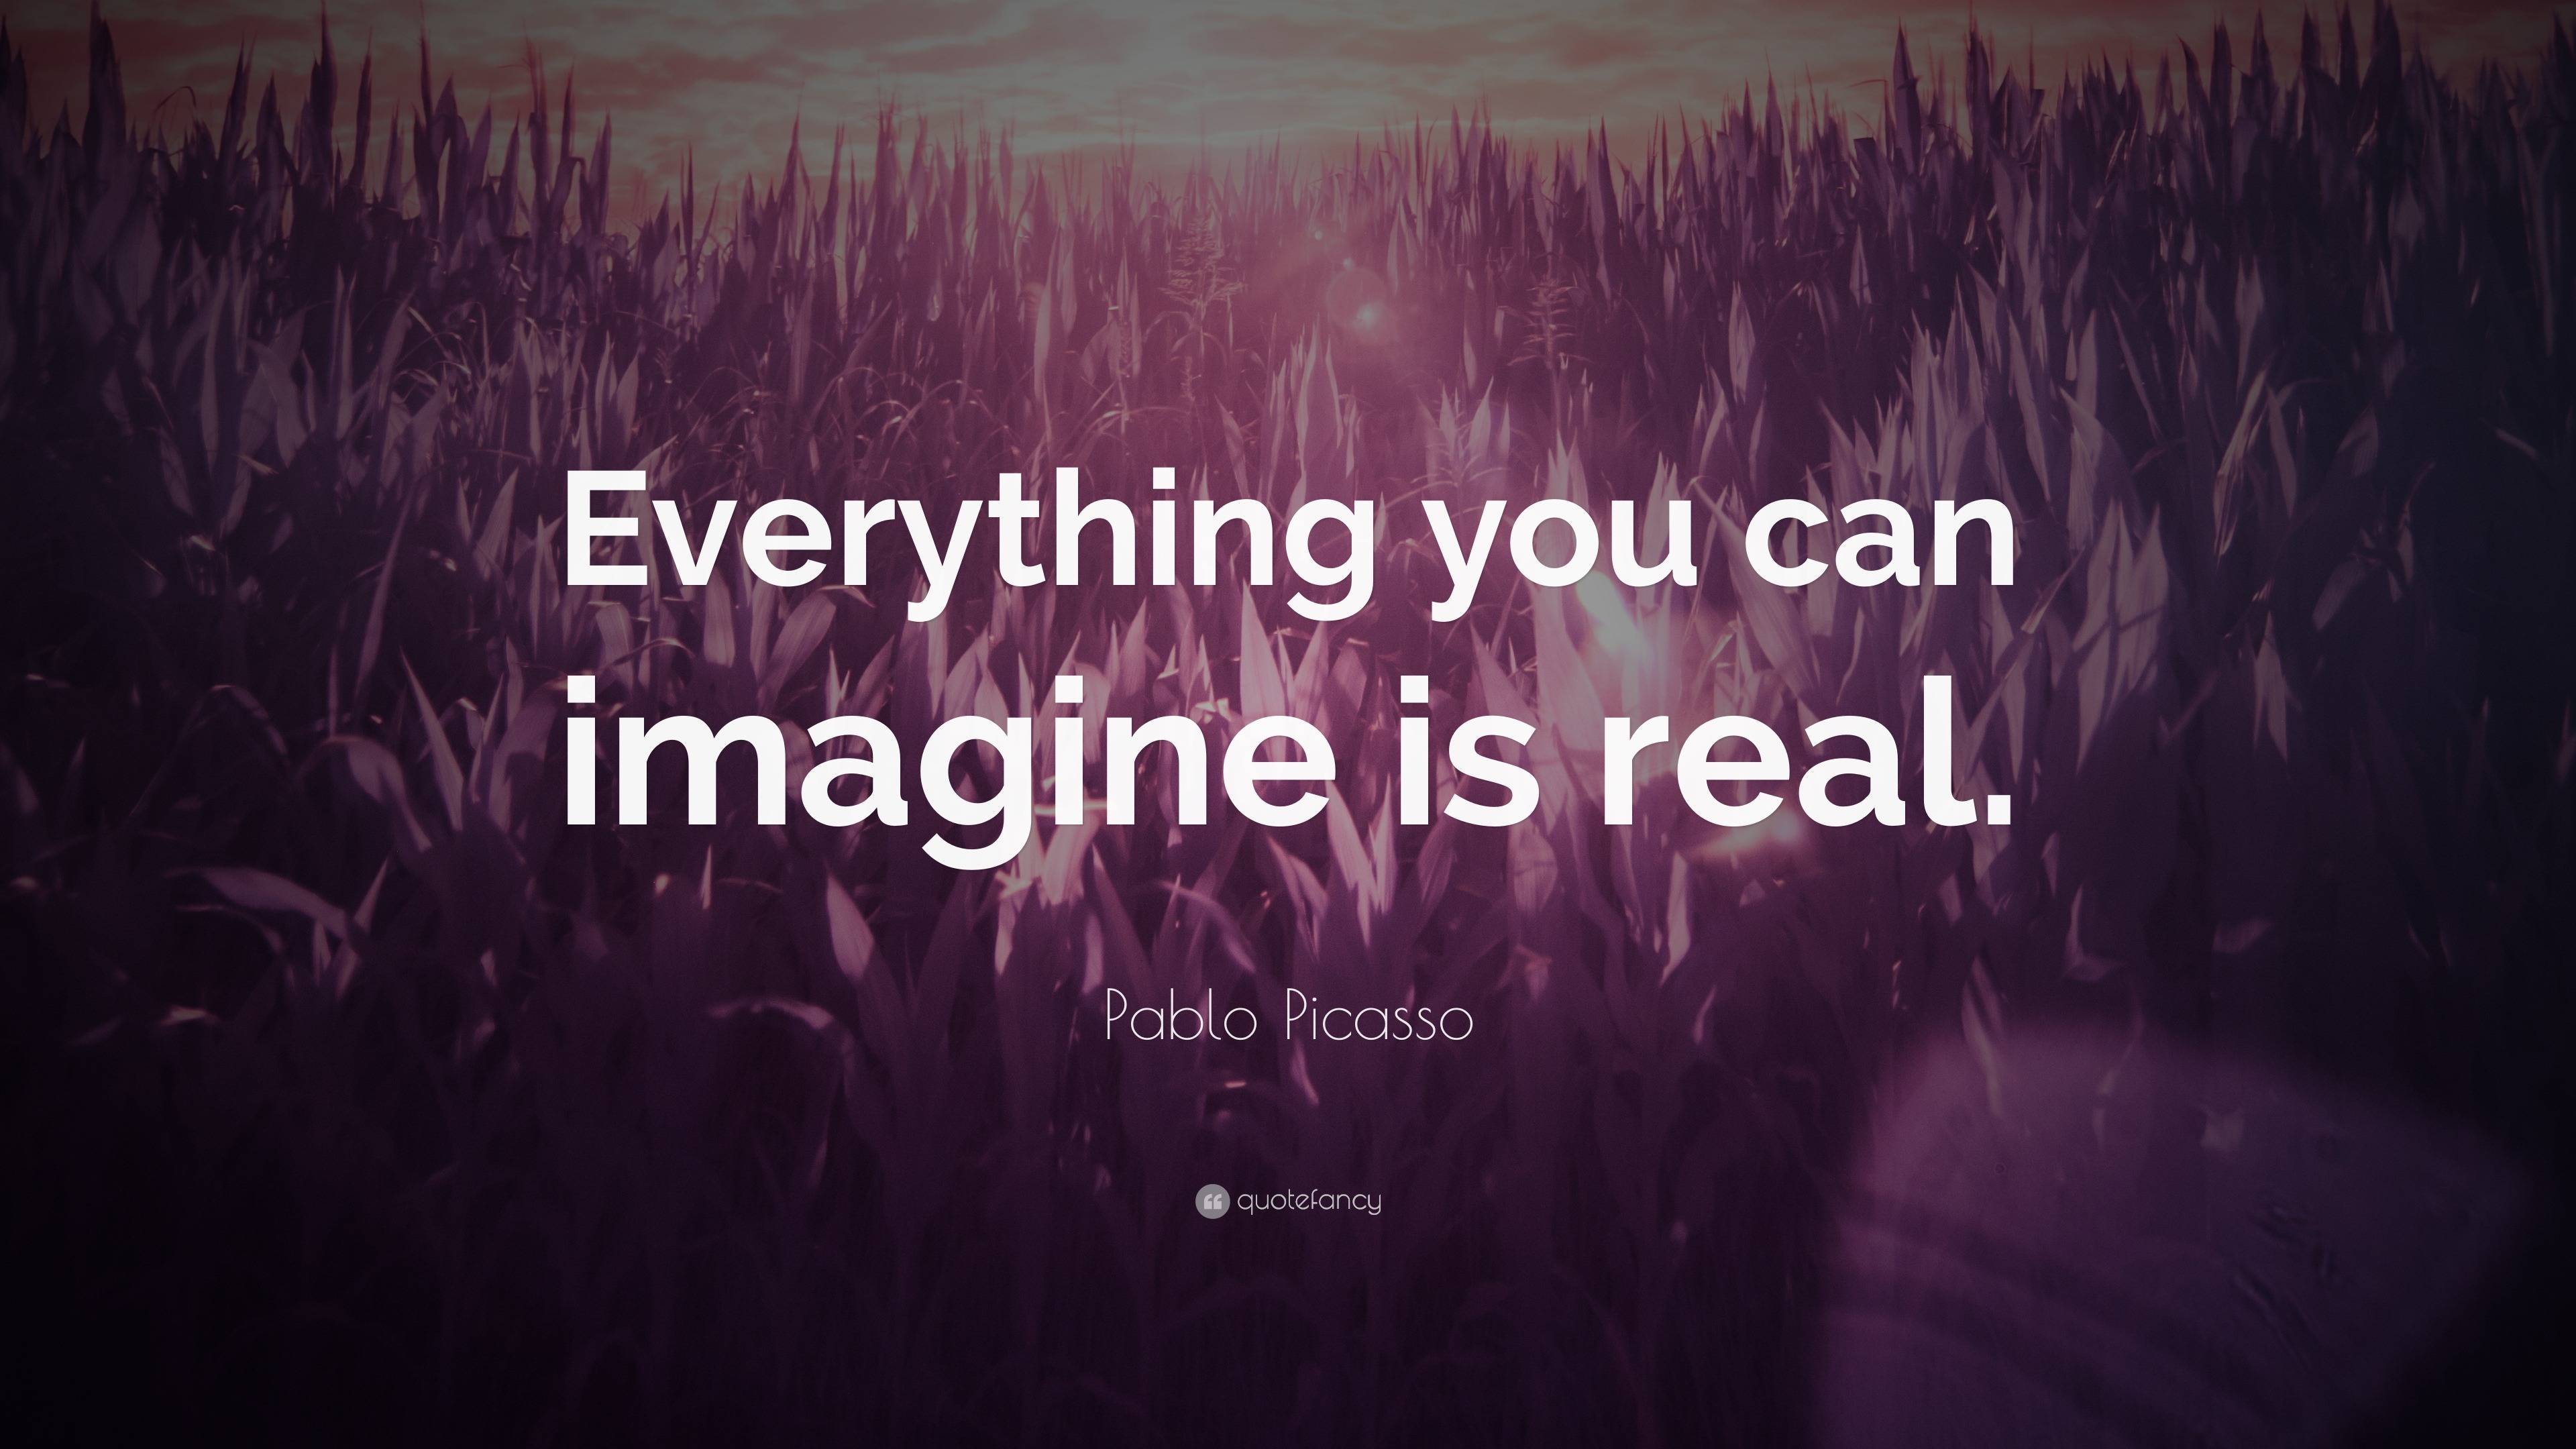 Pablo Picasso Quote: “Everything You Can Imagine Is Real.”